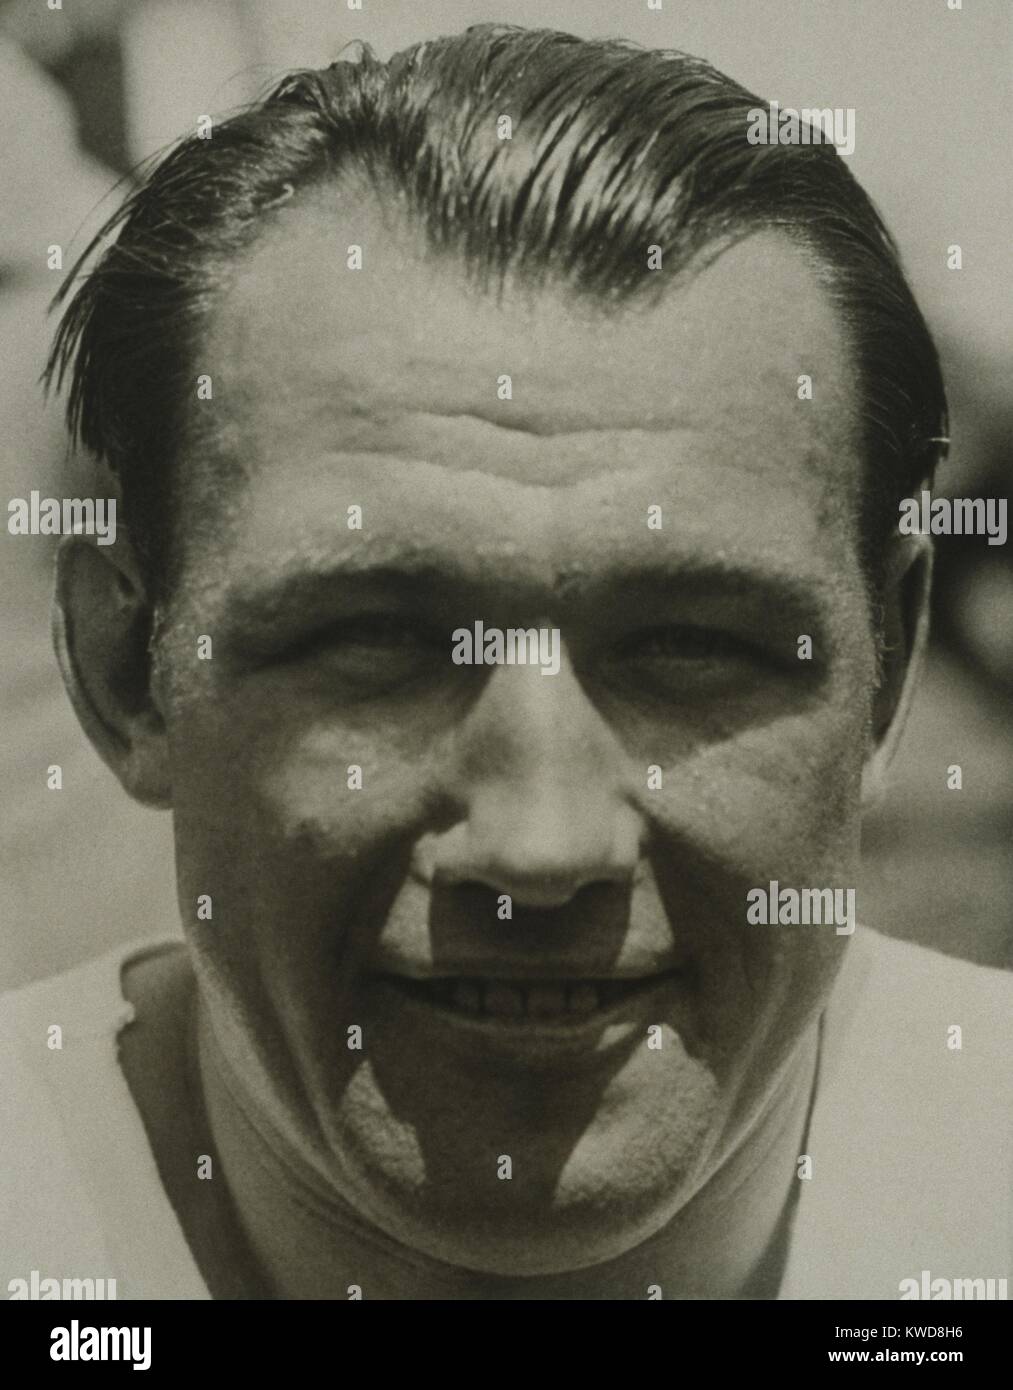 Boxer Jack Sharkey in 1930. He won the American Heavyweight title in Sept. 1929 in a fight with Tommy Loughran. He would lose it on June 12, 1930 in a bout with Max Schmeling. (BSLOC 2015 17 80) Stock Photo